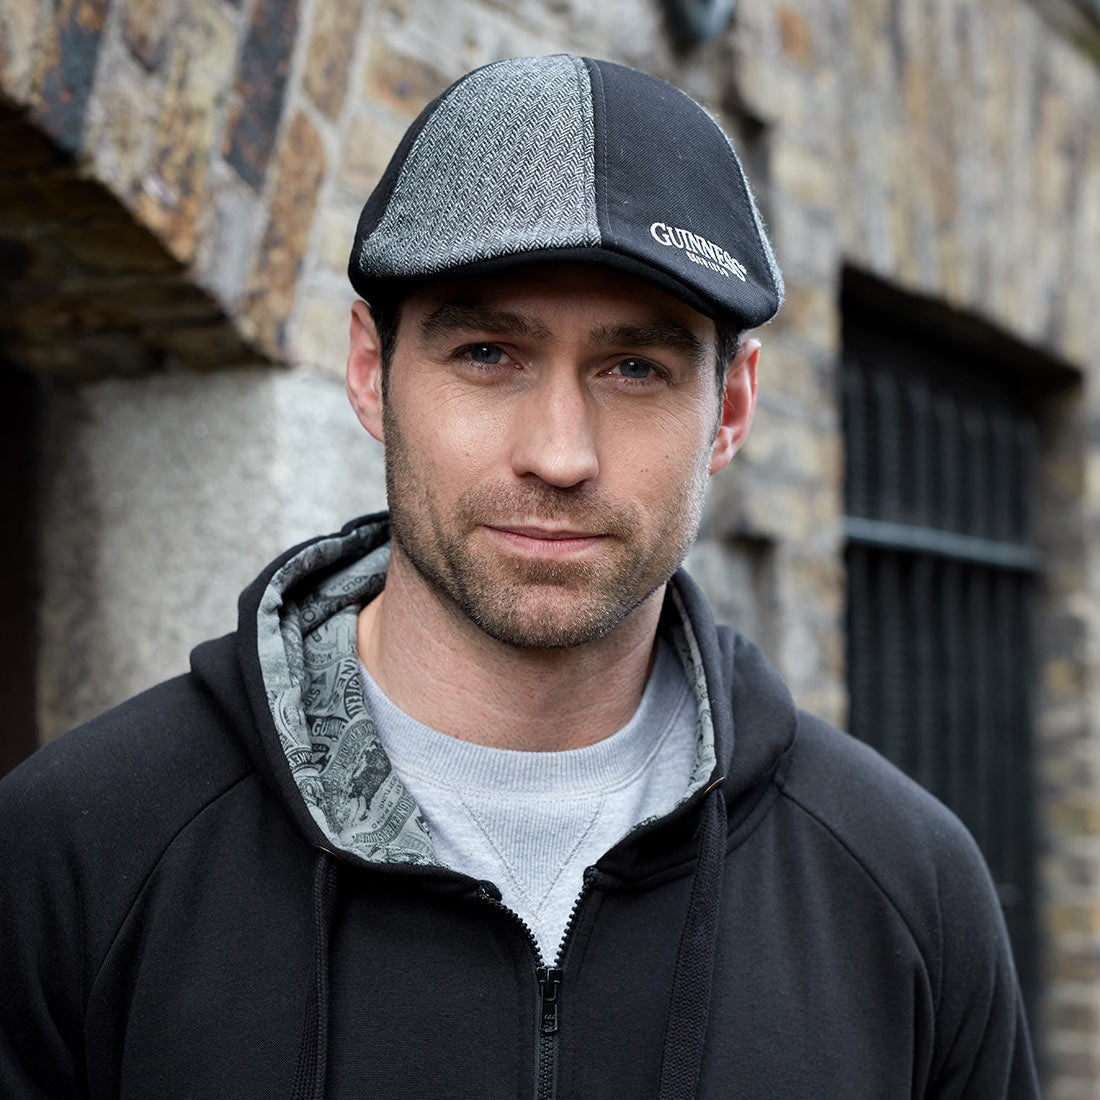 A man wearing a black hoodie, an embroidered Guinness paneled Ivy cap, and a hat.